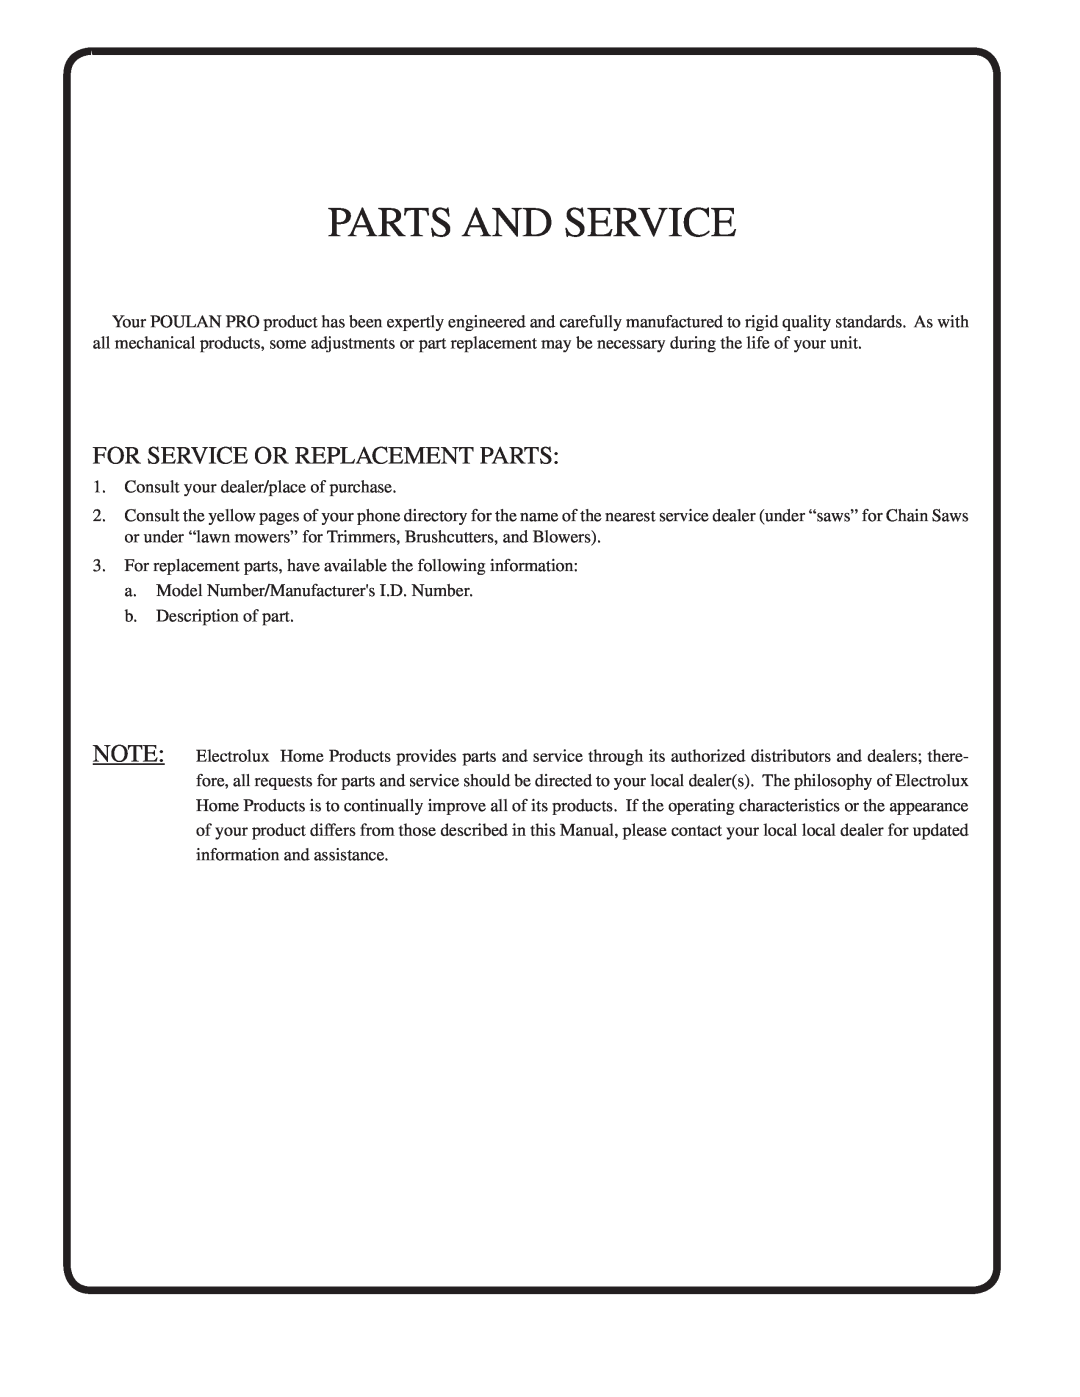 Poulan 188781 owner manual Parts And Service, For Service Or Replacement Parts 